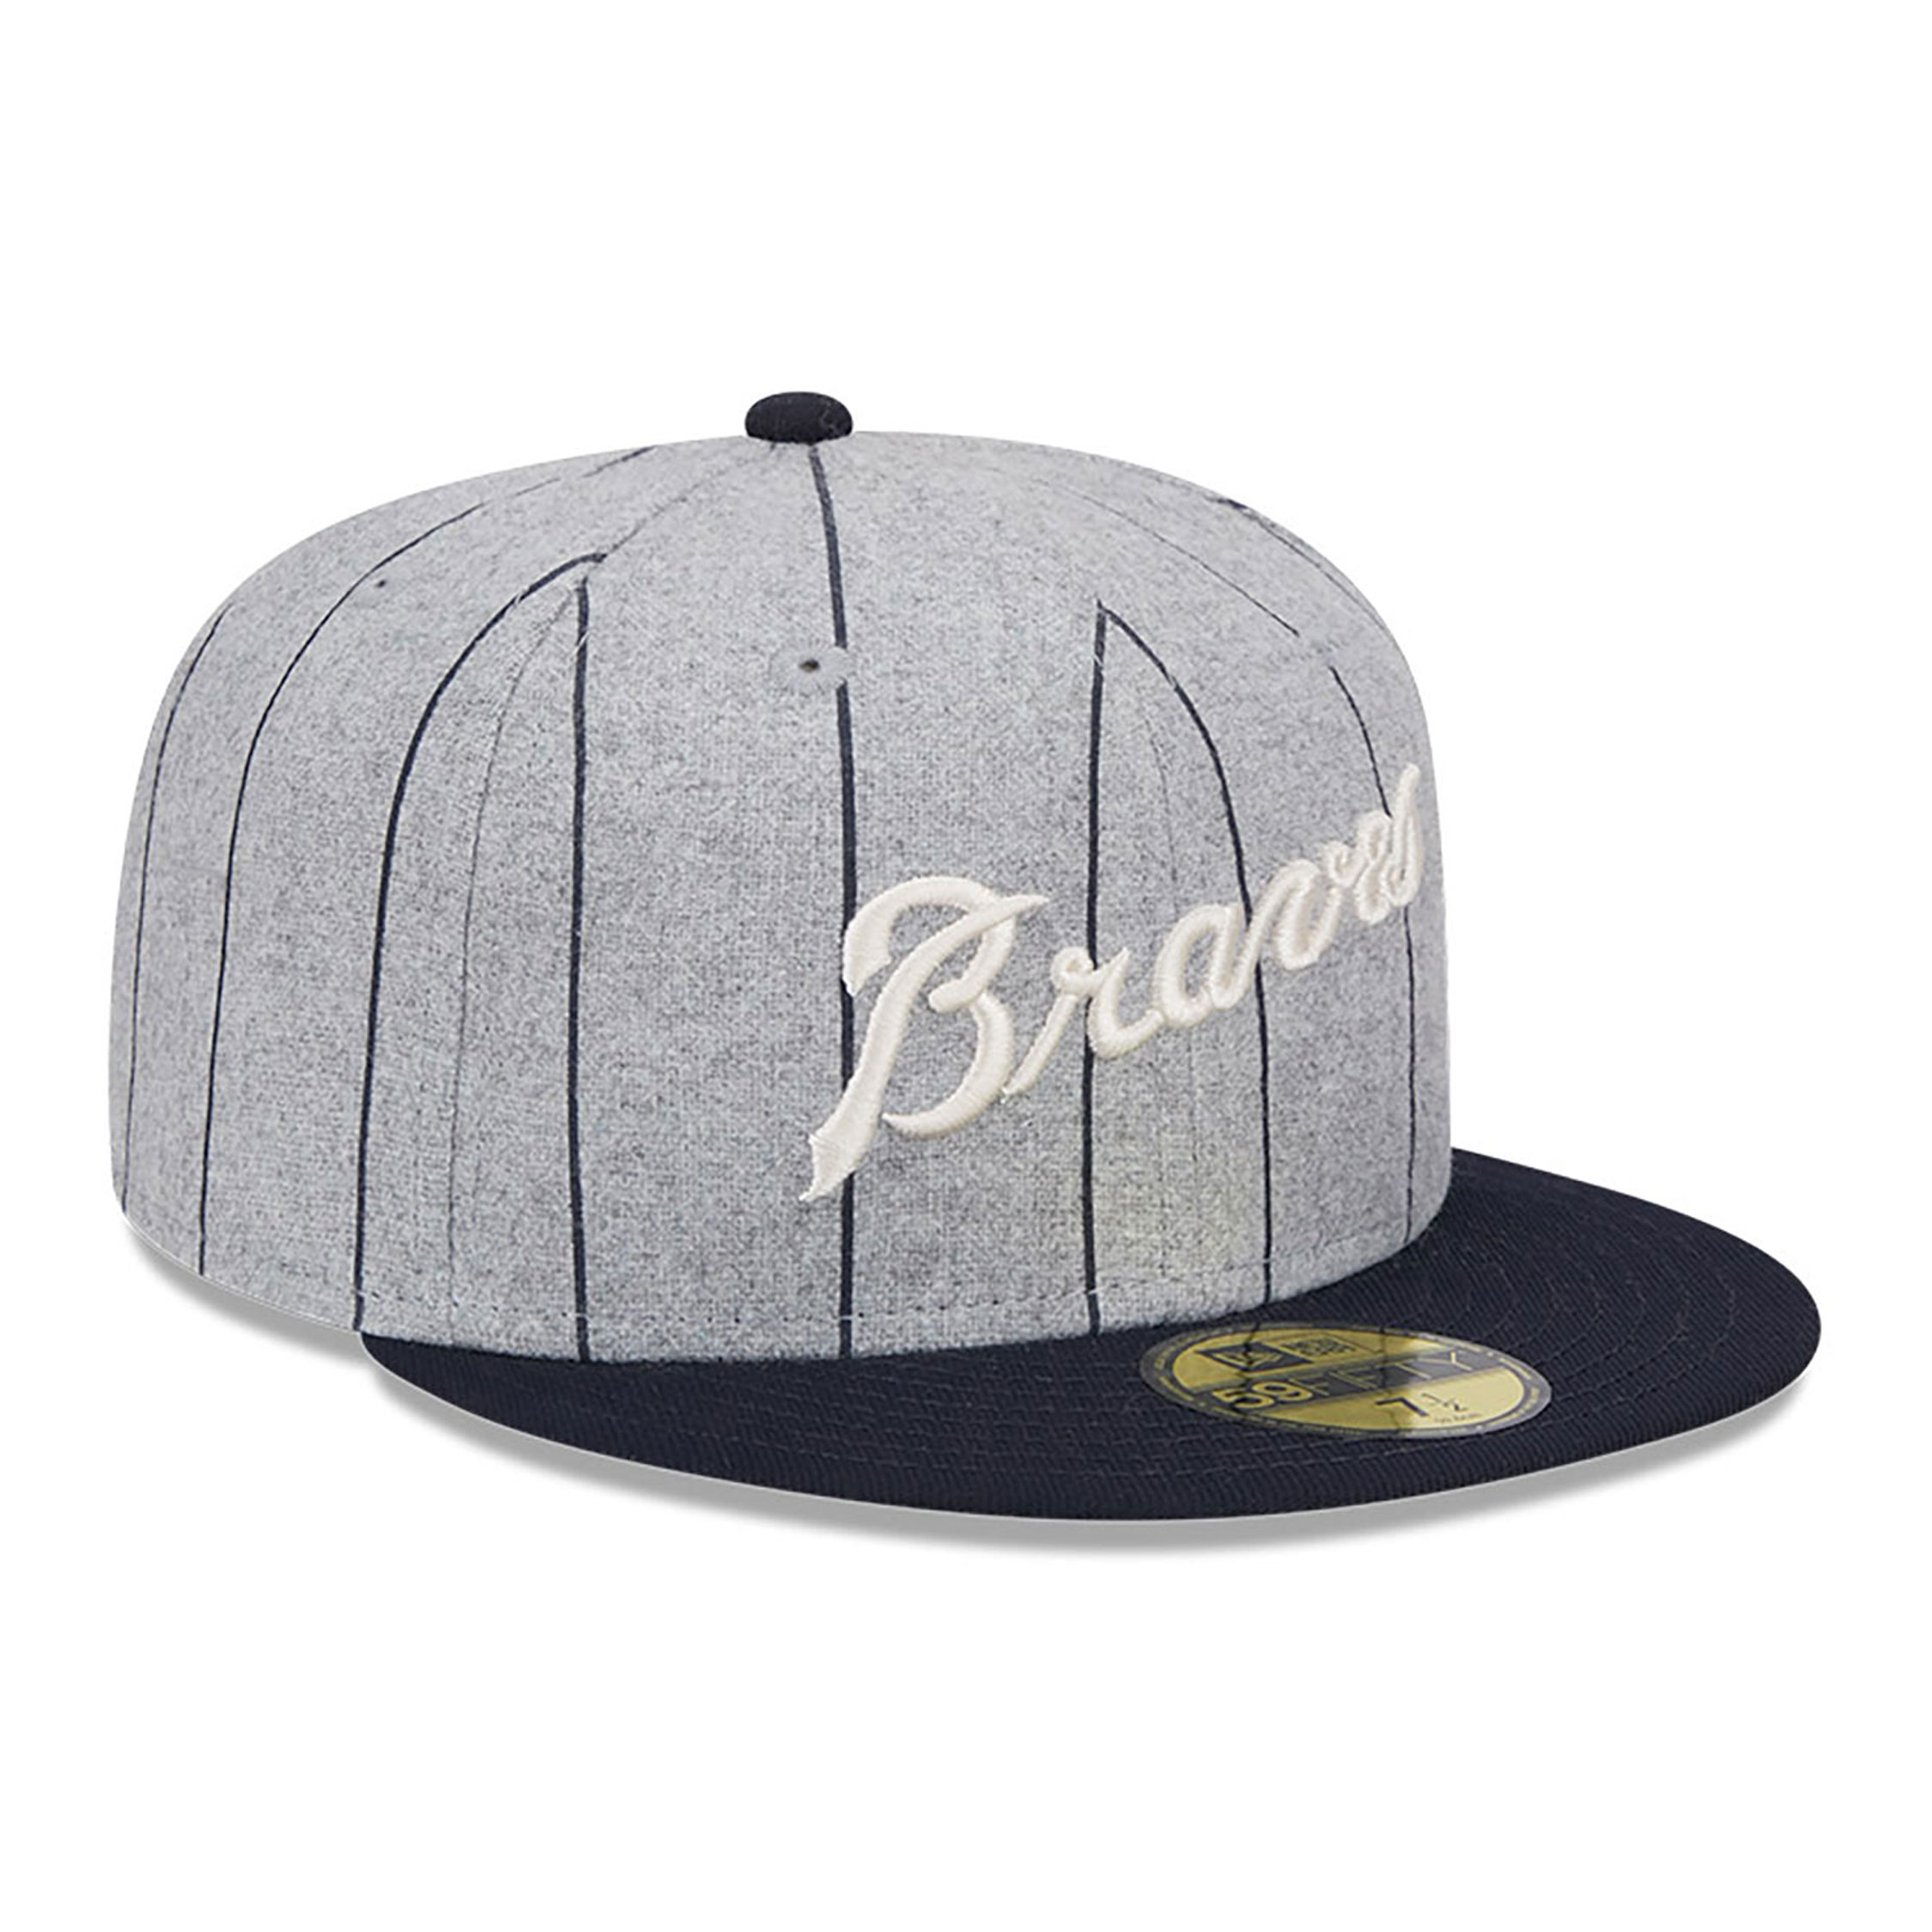 Atlanta Braves Heather Pinstripe Grey 59FIFTY Fitted Cap